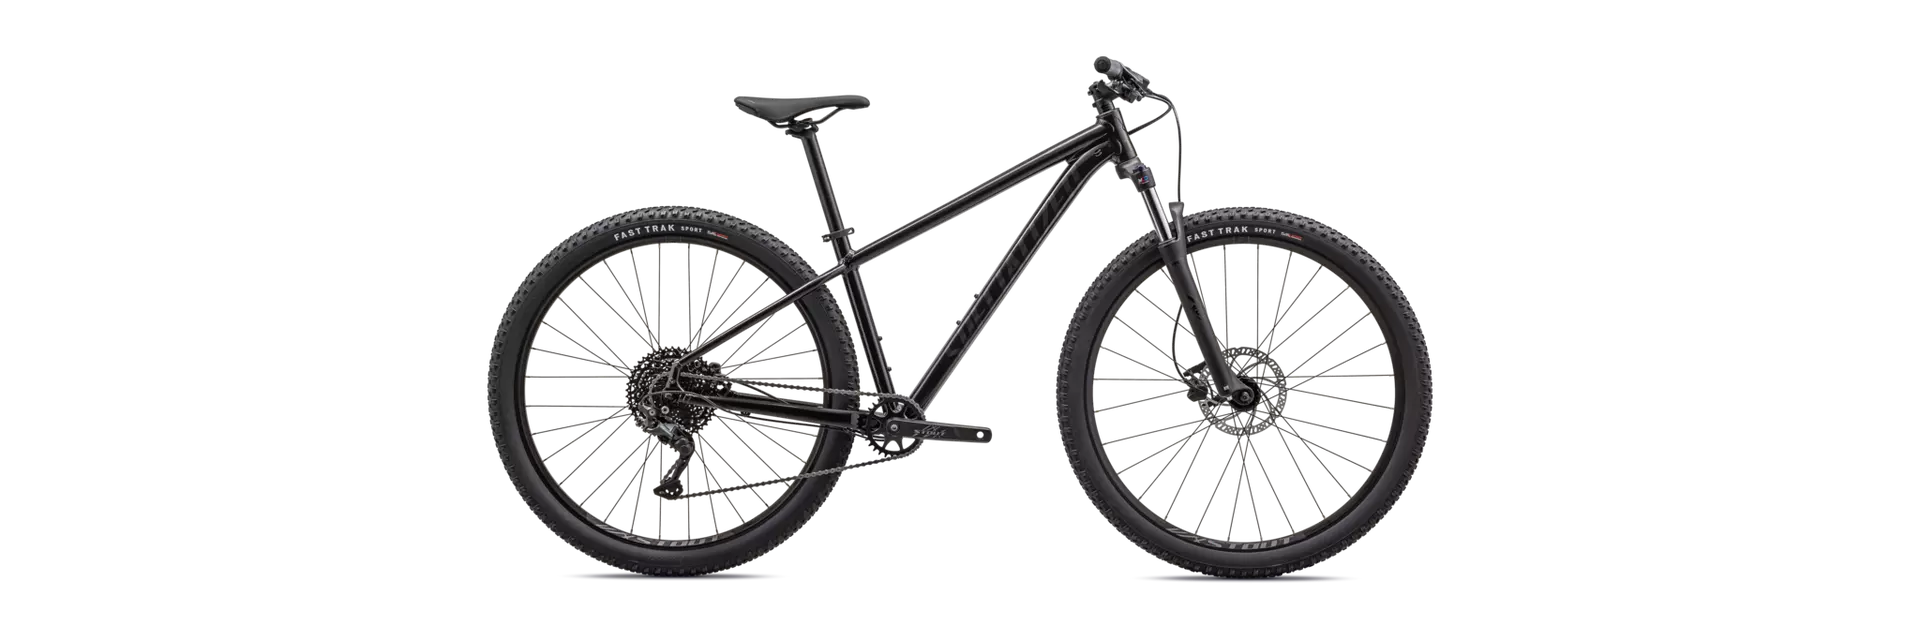 Specialized ROCKHOPPER COMP 29 Obsd/Metobsd